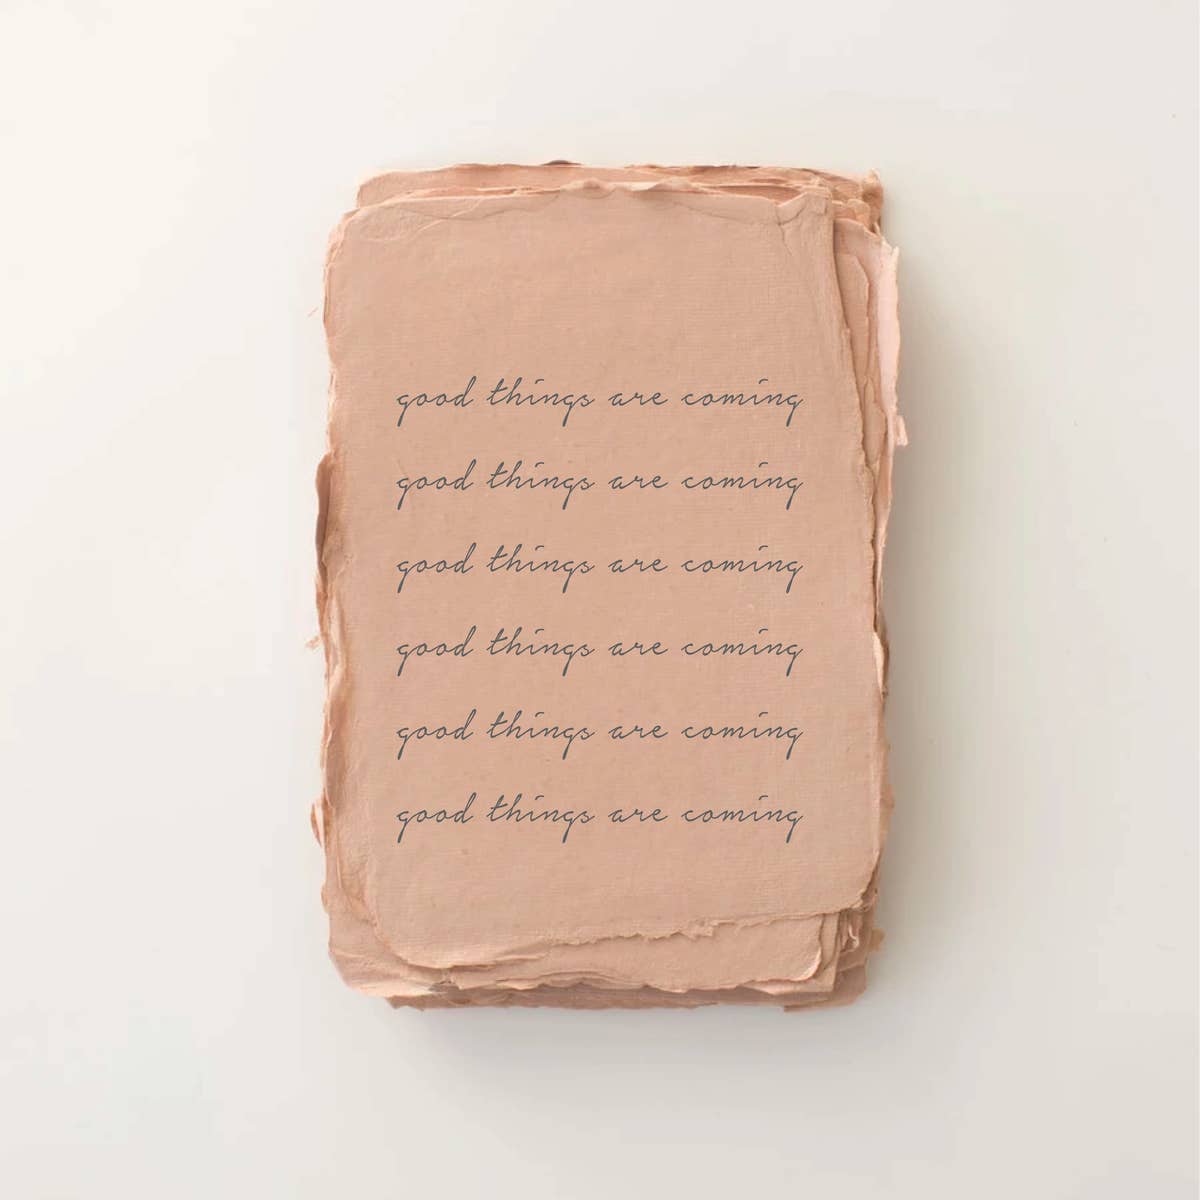 "Good things are coming" greeting card by Paper Baristas